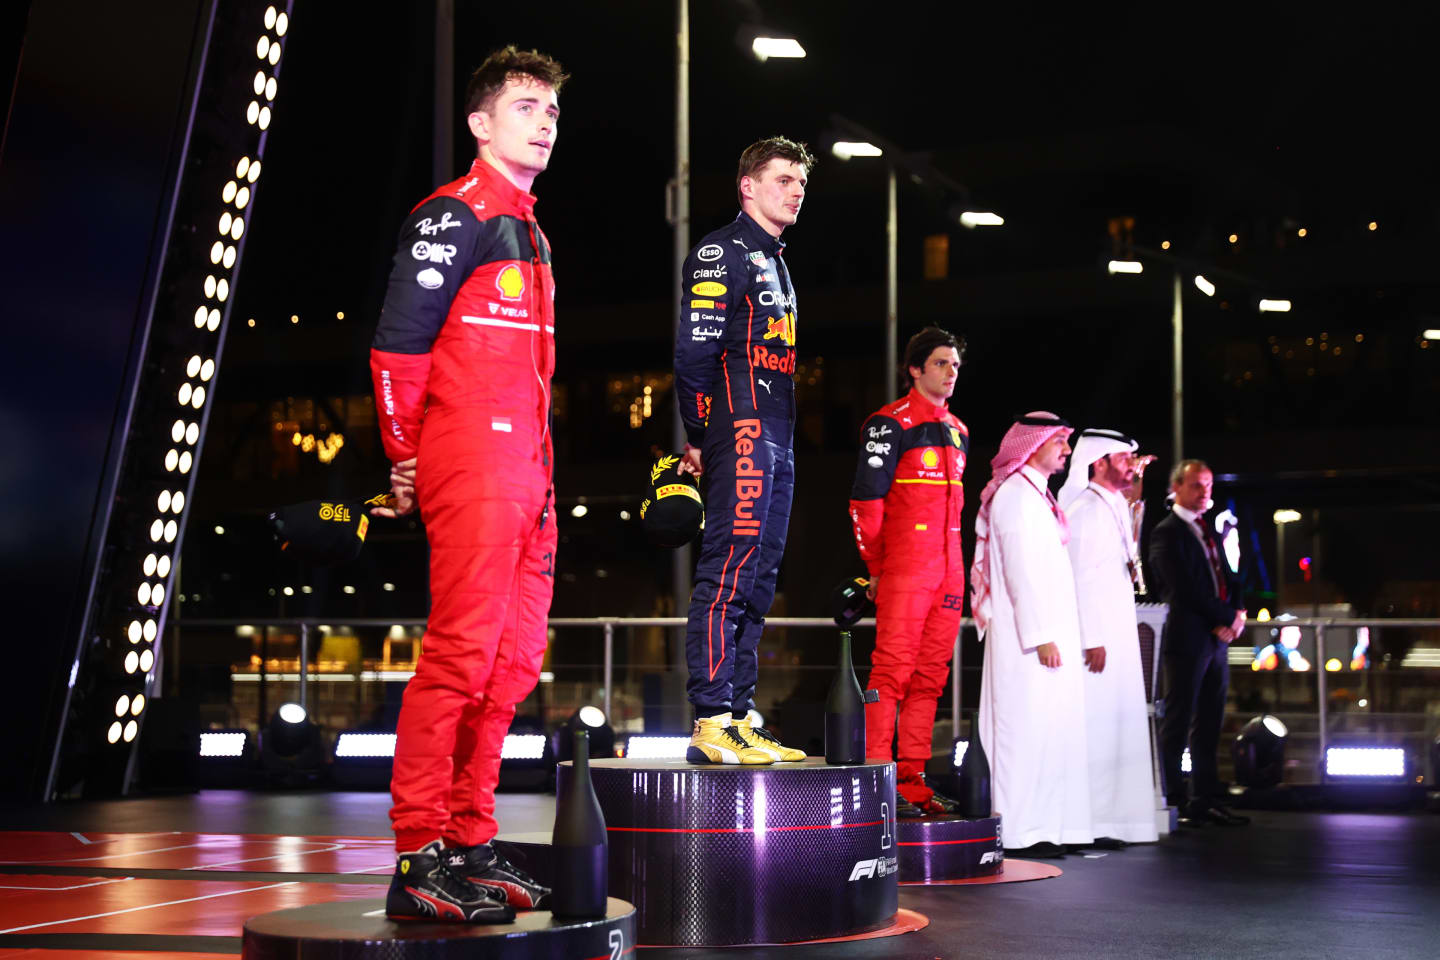 JEDDAH, SAUDI ARABIA - MARCH 27: Race winner Max Verstappen of the Netherlands and Oracle Red Bull Racing, Second placed Charles Leclerc of Monaco and Ferrari and Third placed Carlos Sainz of Spain and Ferrari stand on the podium during the F1 Grand Prix of Saudi Arabia at the Jeddah Corniche Circuit on March 27, 2022 in Jeddah, Saudi Arabia. (Photo by Dan Istitene - Formula 1/Formula 1 via Getty Images)